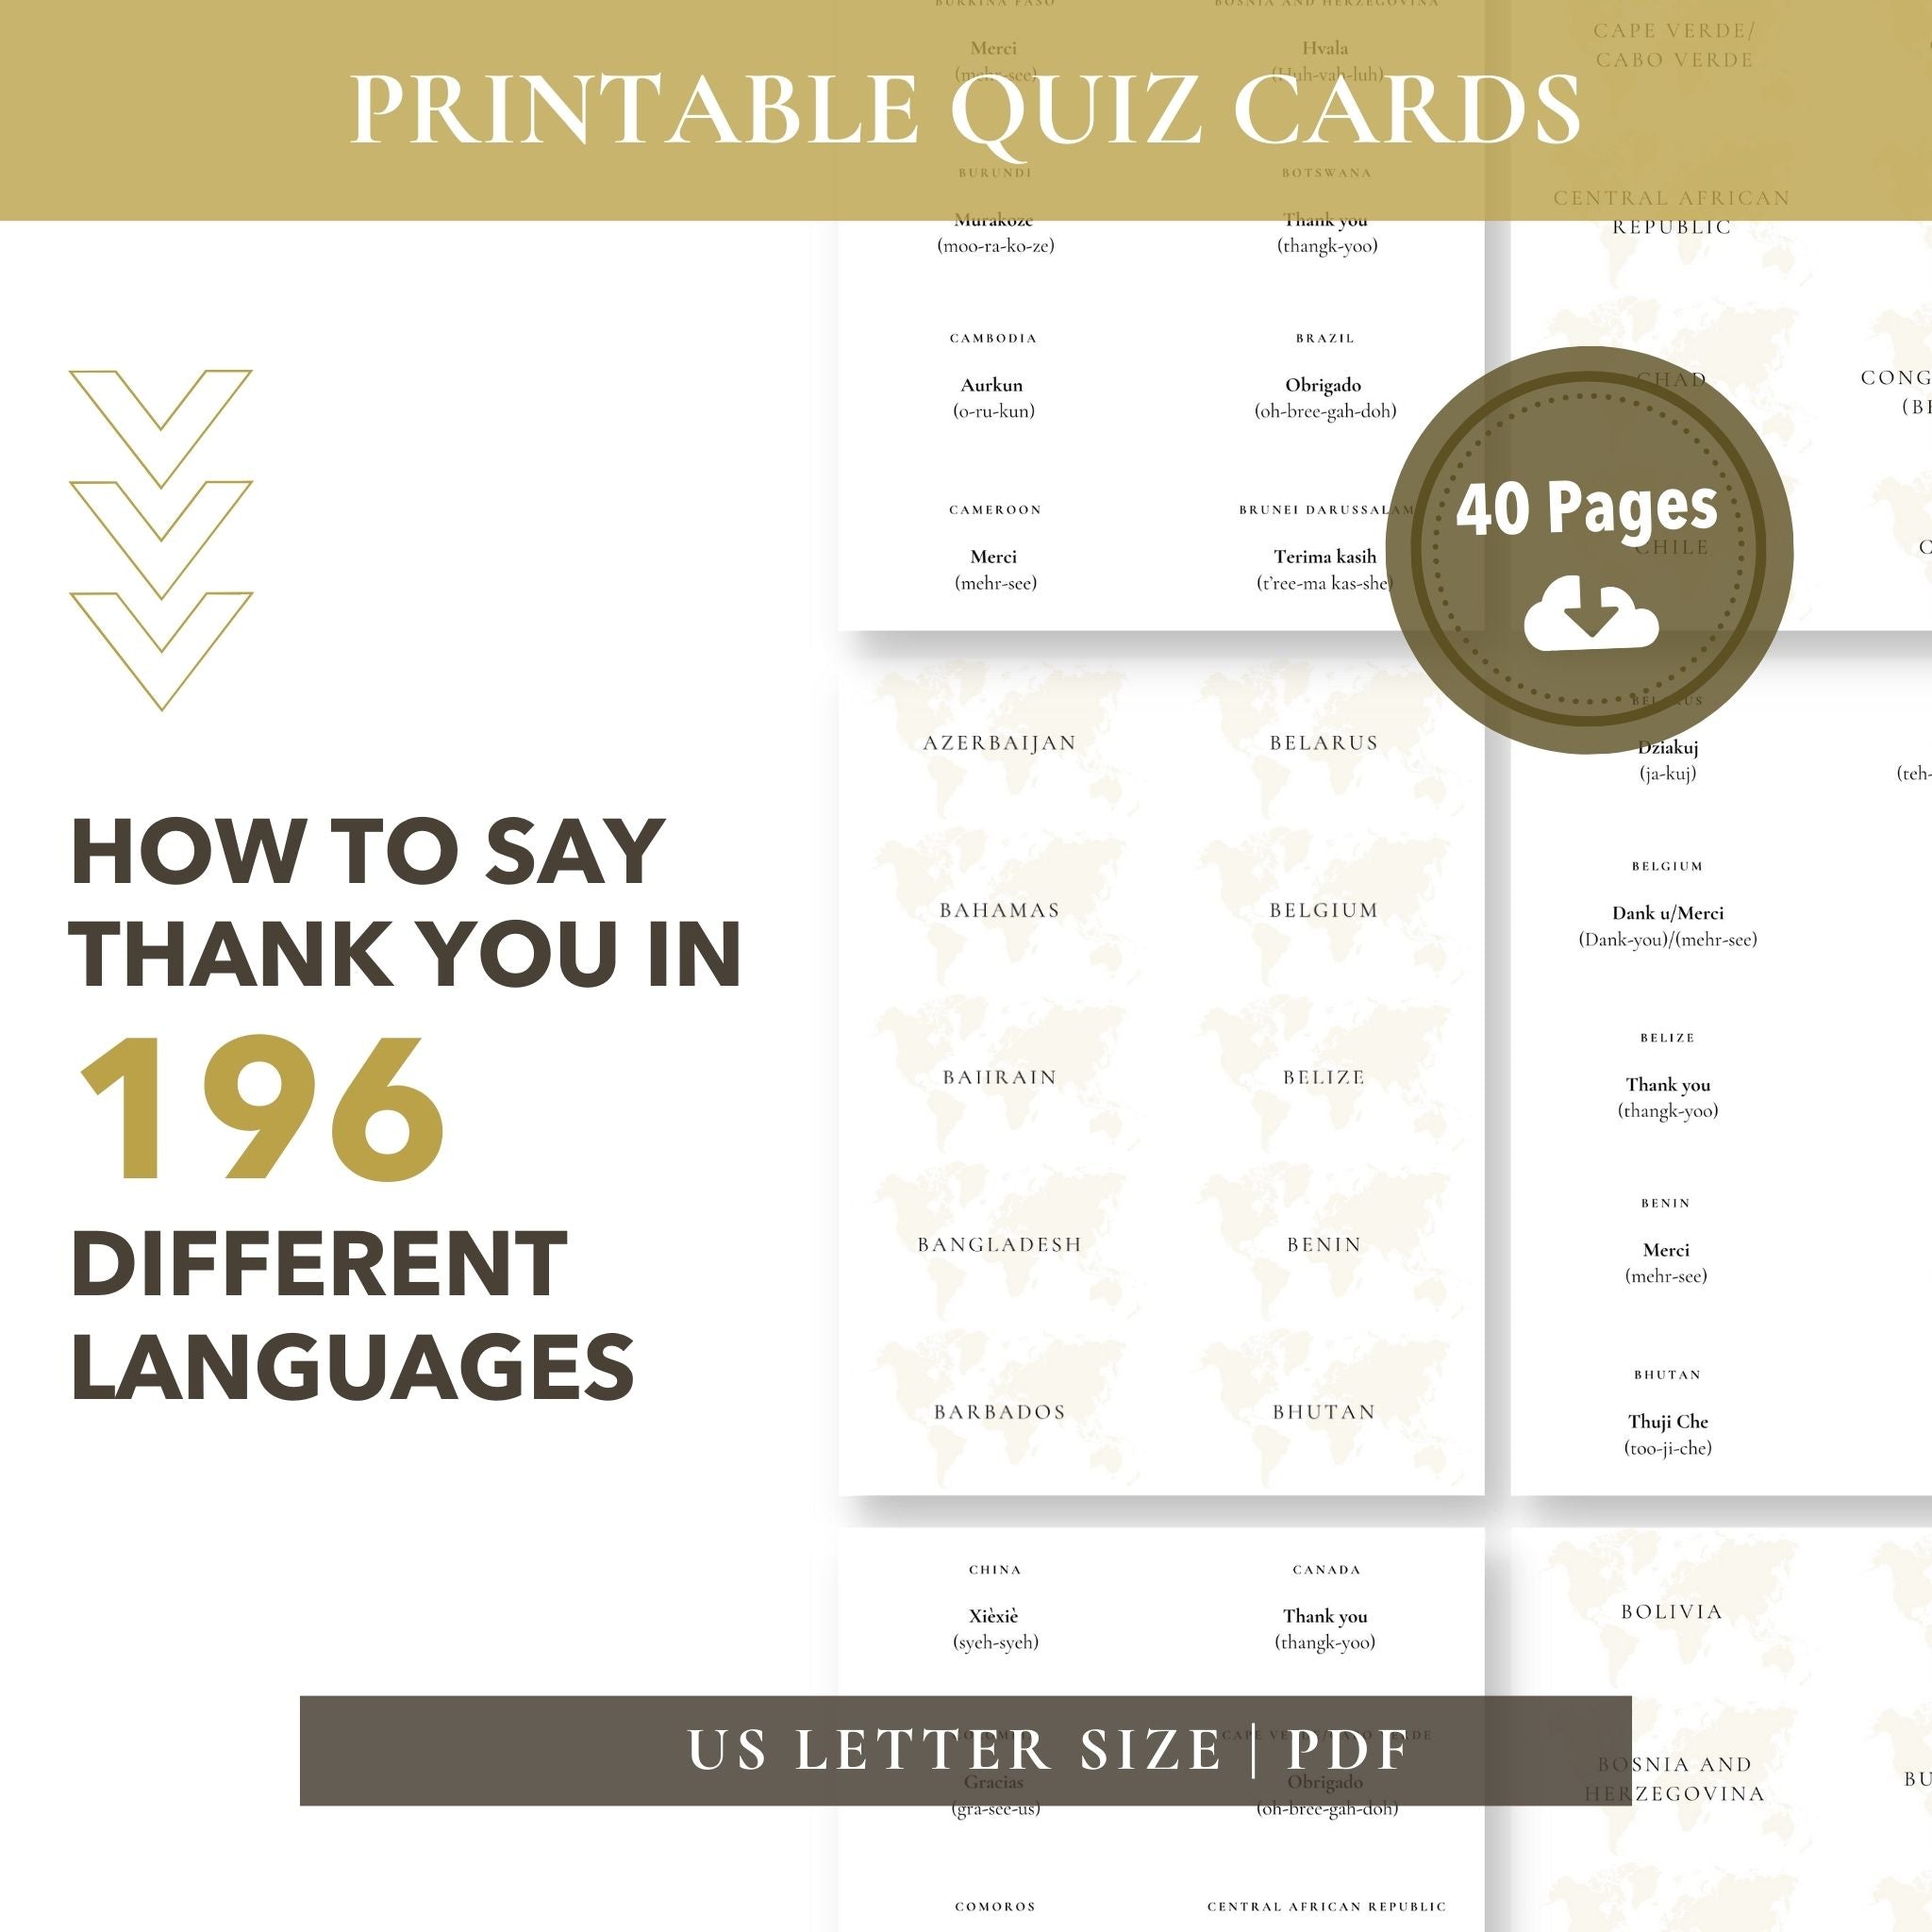 Thank You in 196 Different Languages Cards (Printable)